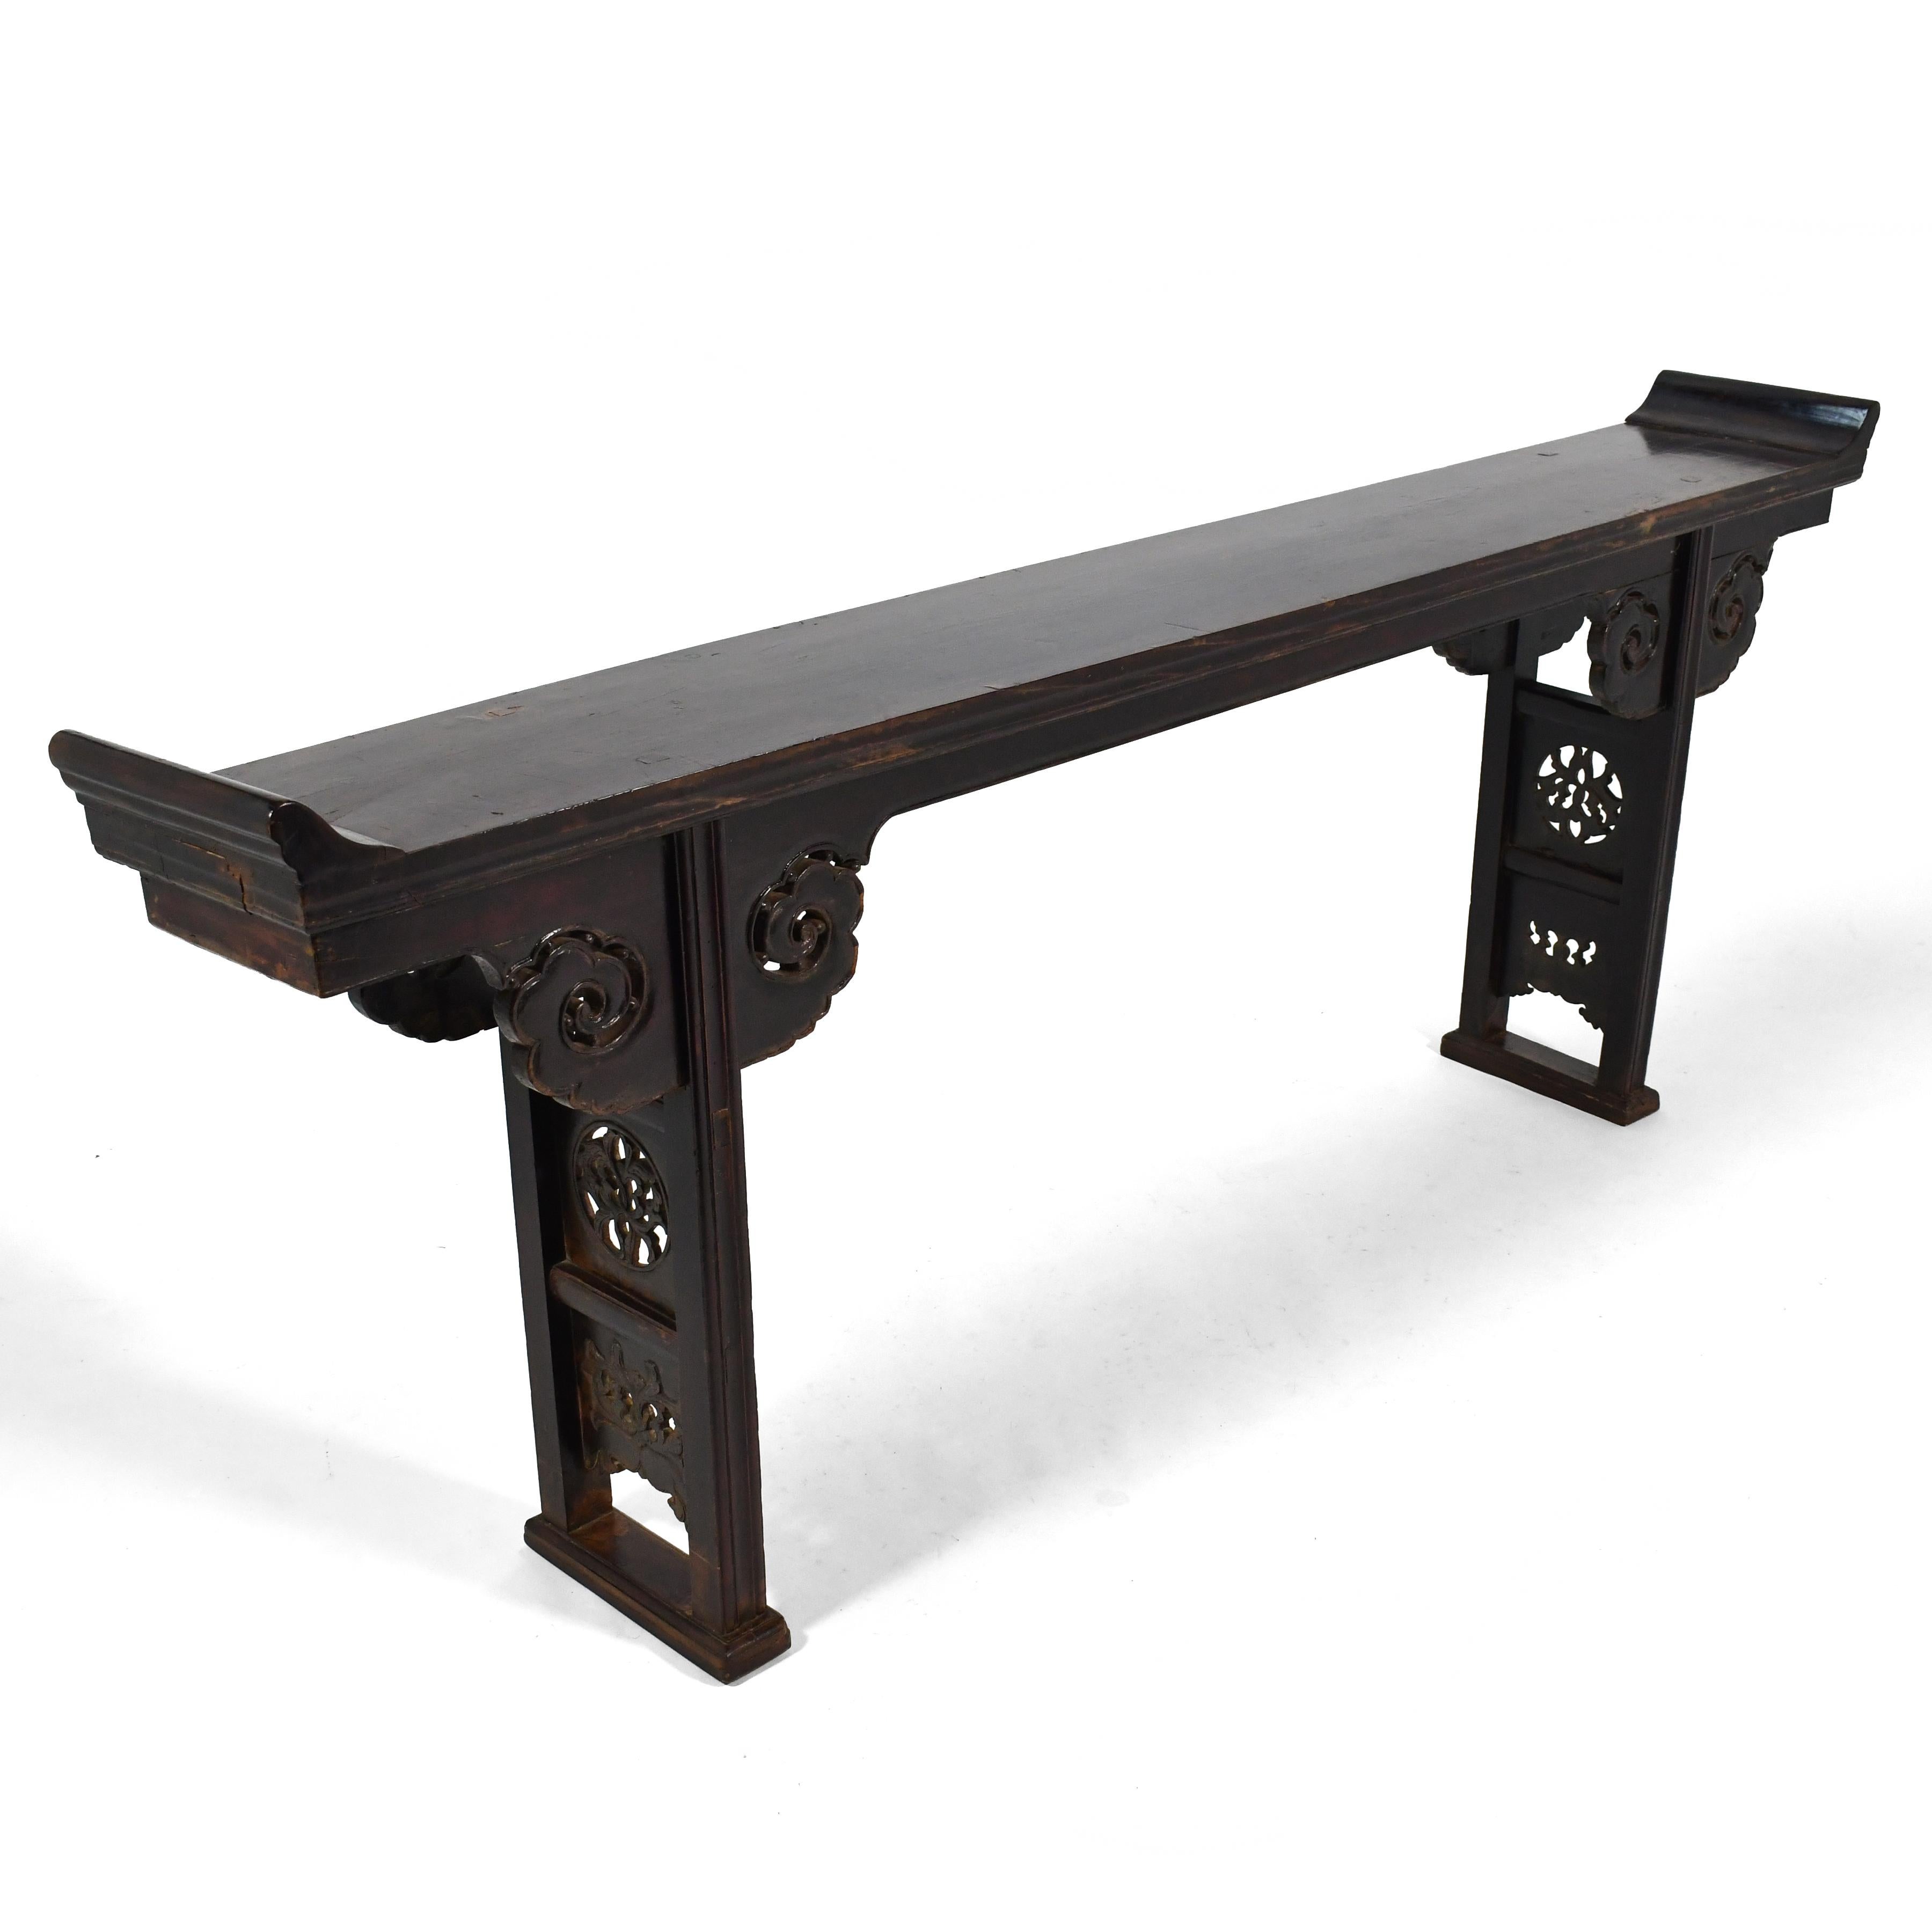 This large and strikingly beautiful Chinese alter table almost has more wonderful features than we can list here. It has the perfect amount of decorative carved detail, everted ends, through-tenon and butterfly joinery, and of course, a rich patina